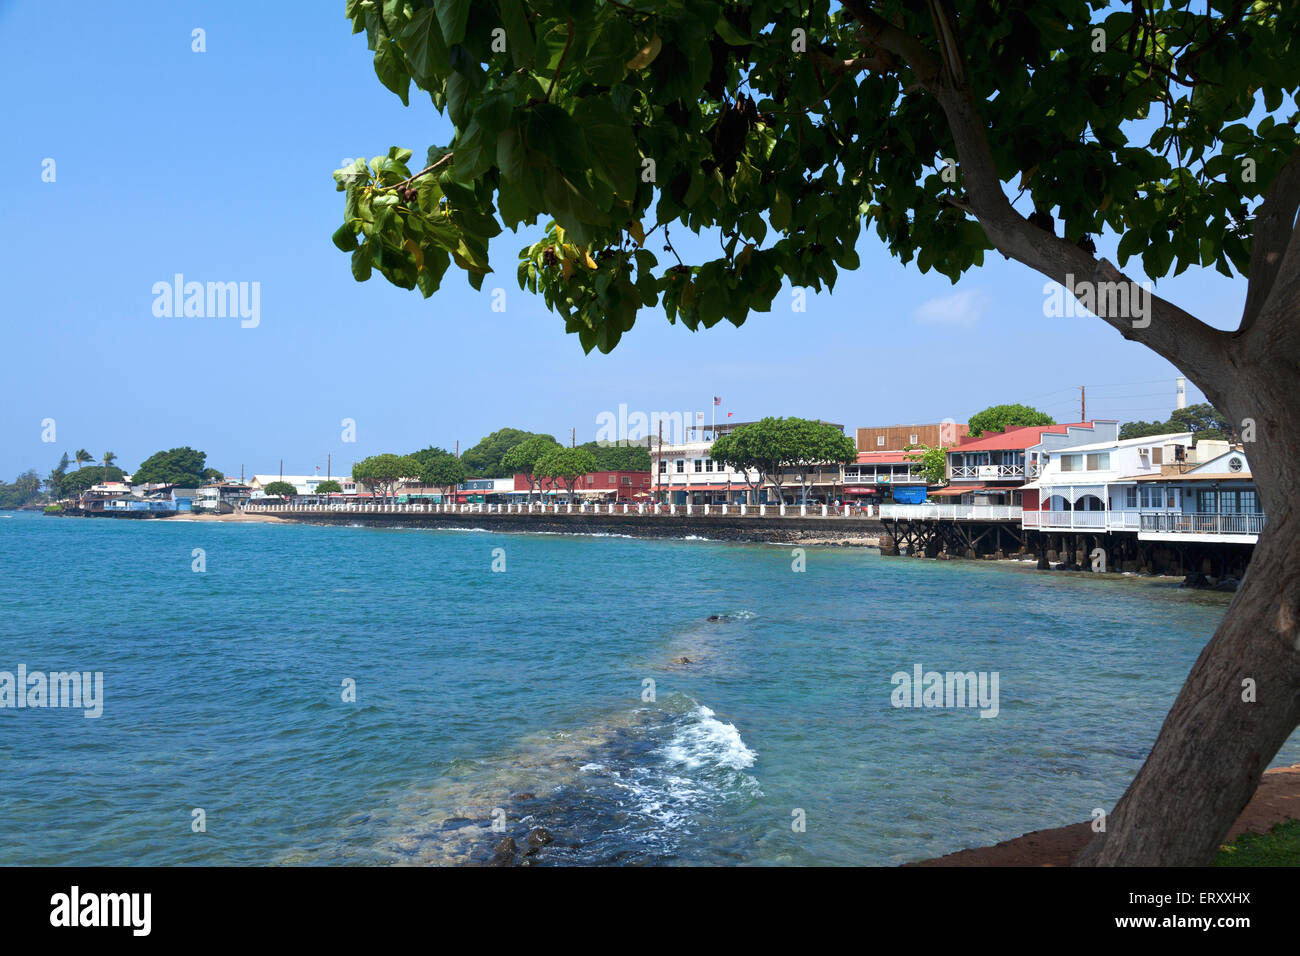 Waterfront of Lahaina., the largest town on the island of Maui, Hawaii. Stock Photo